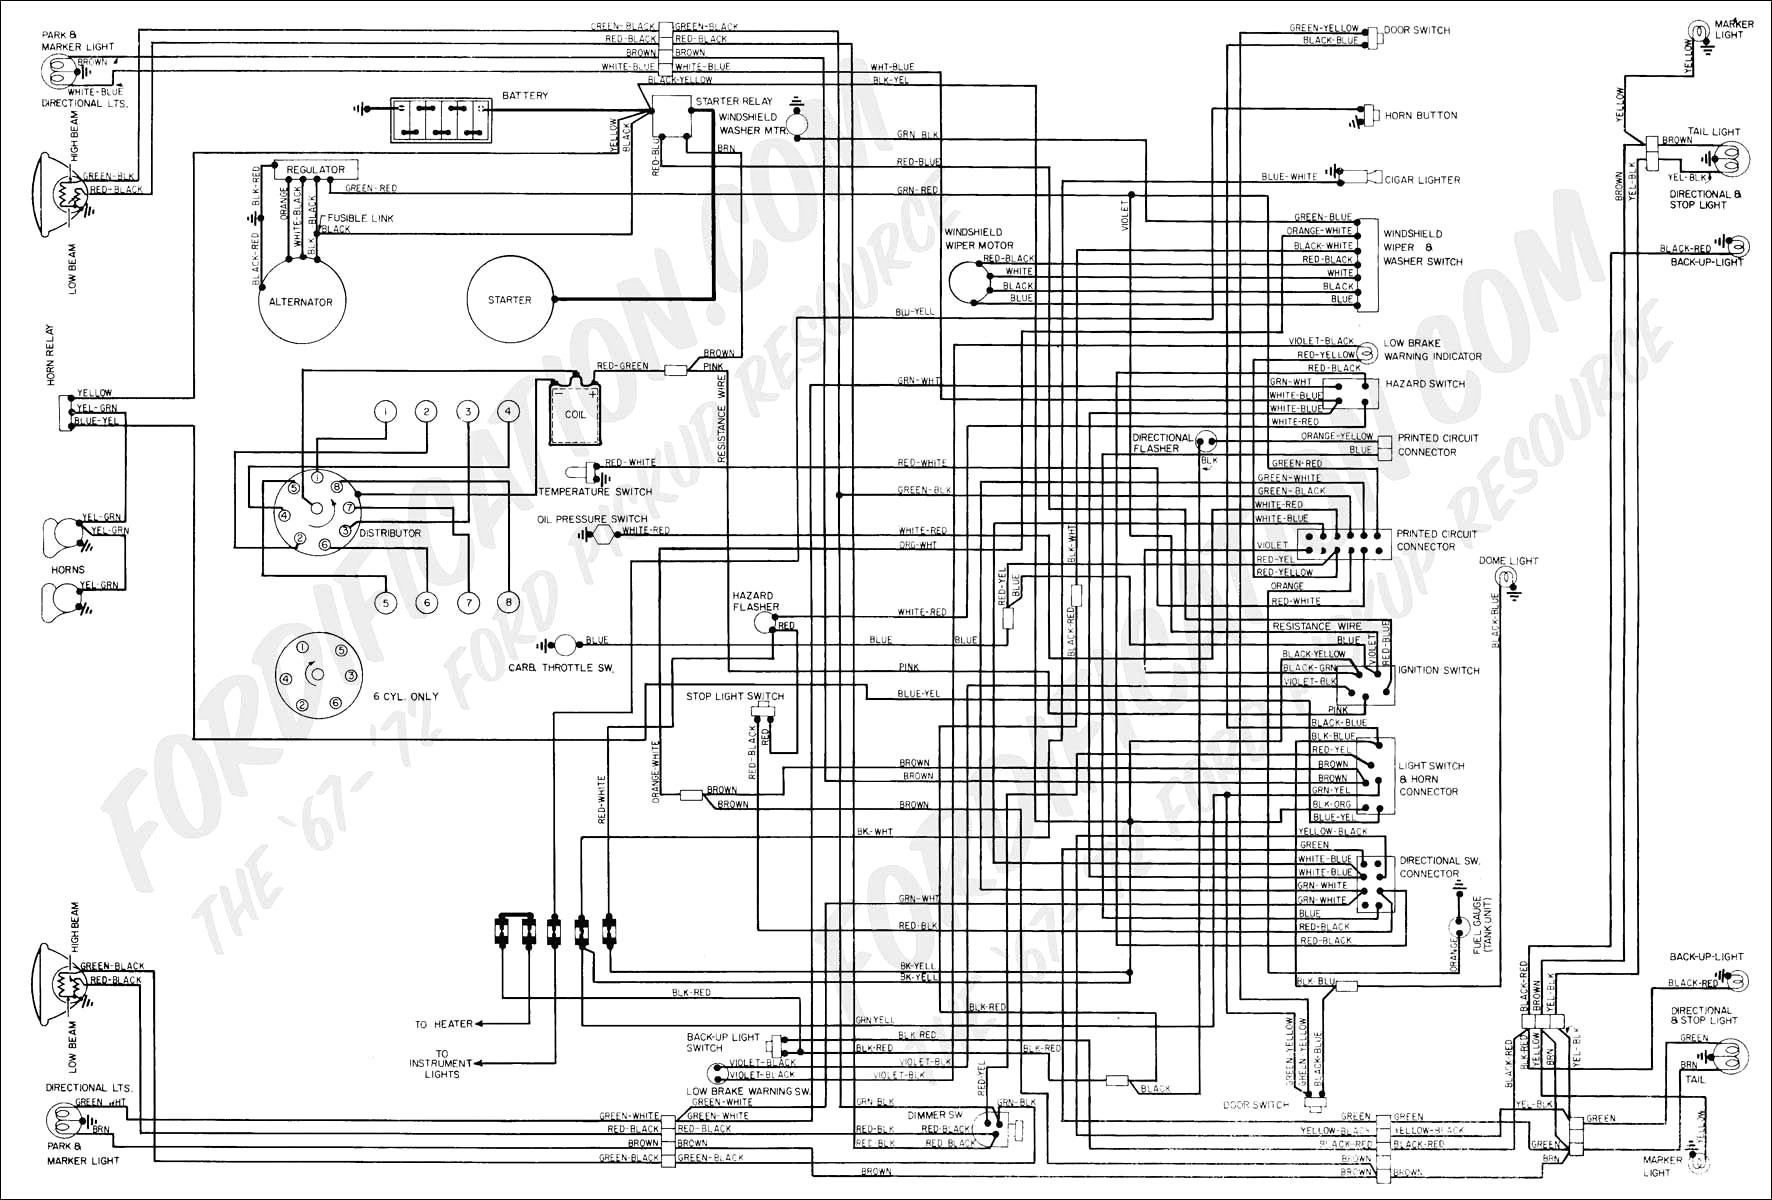 Wiring Diagram for 2000 ford F250 Taillights 2001 ford F350 Wiring Diagram Wiring Diagram Schematic Of Wiring Diagram for 2000 ford F250 Taillights